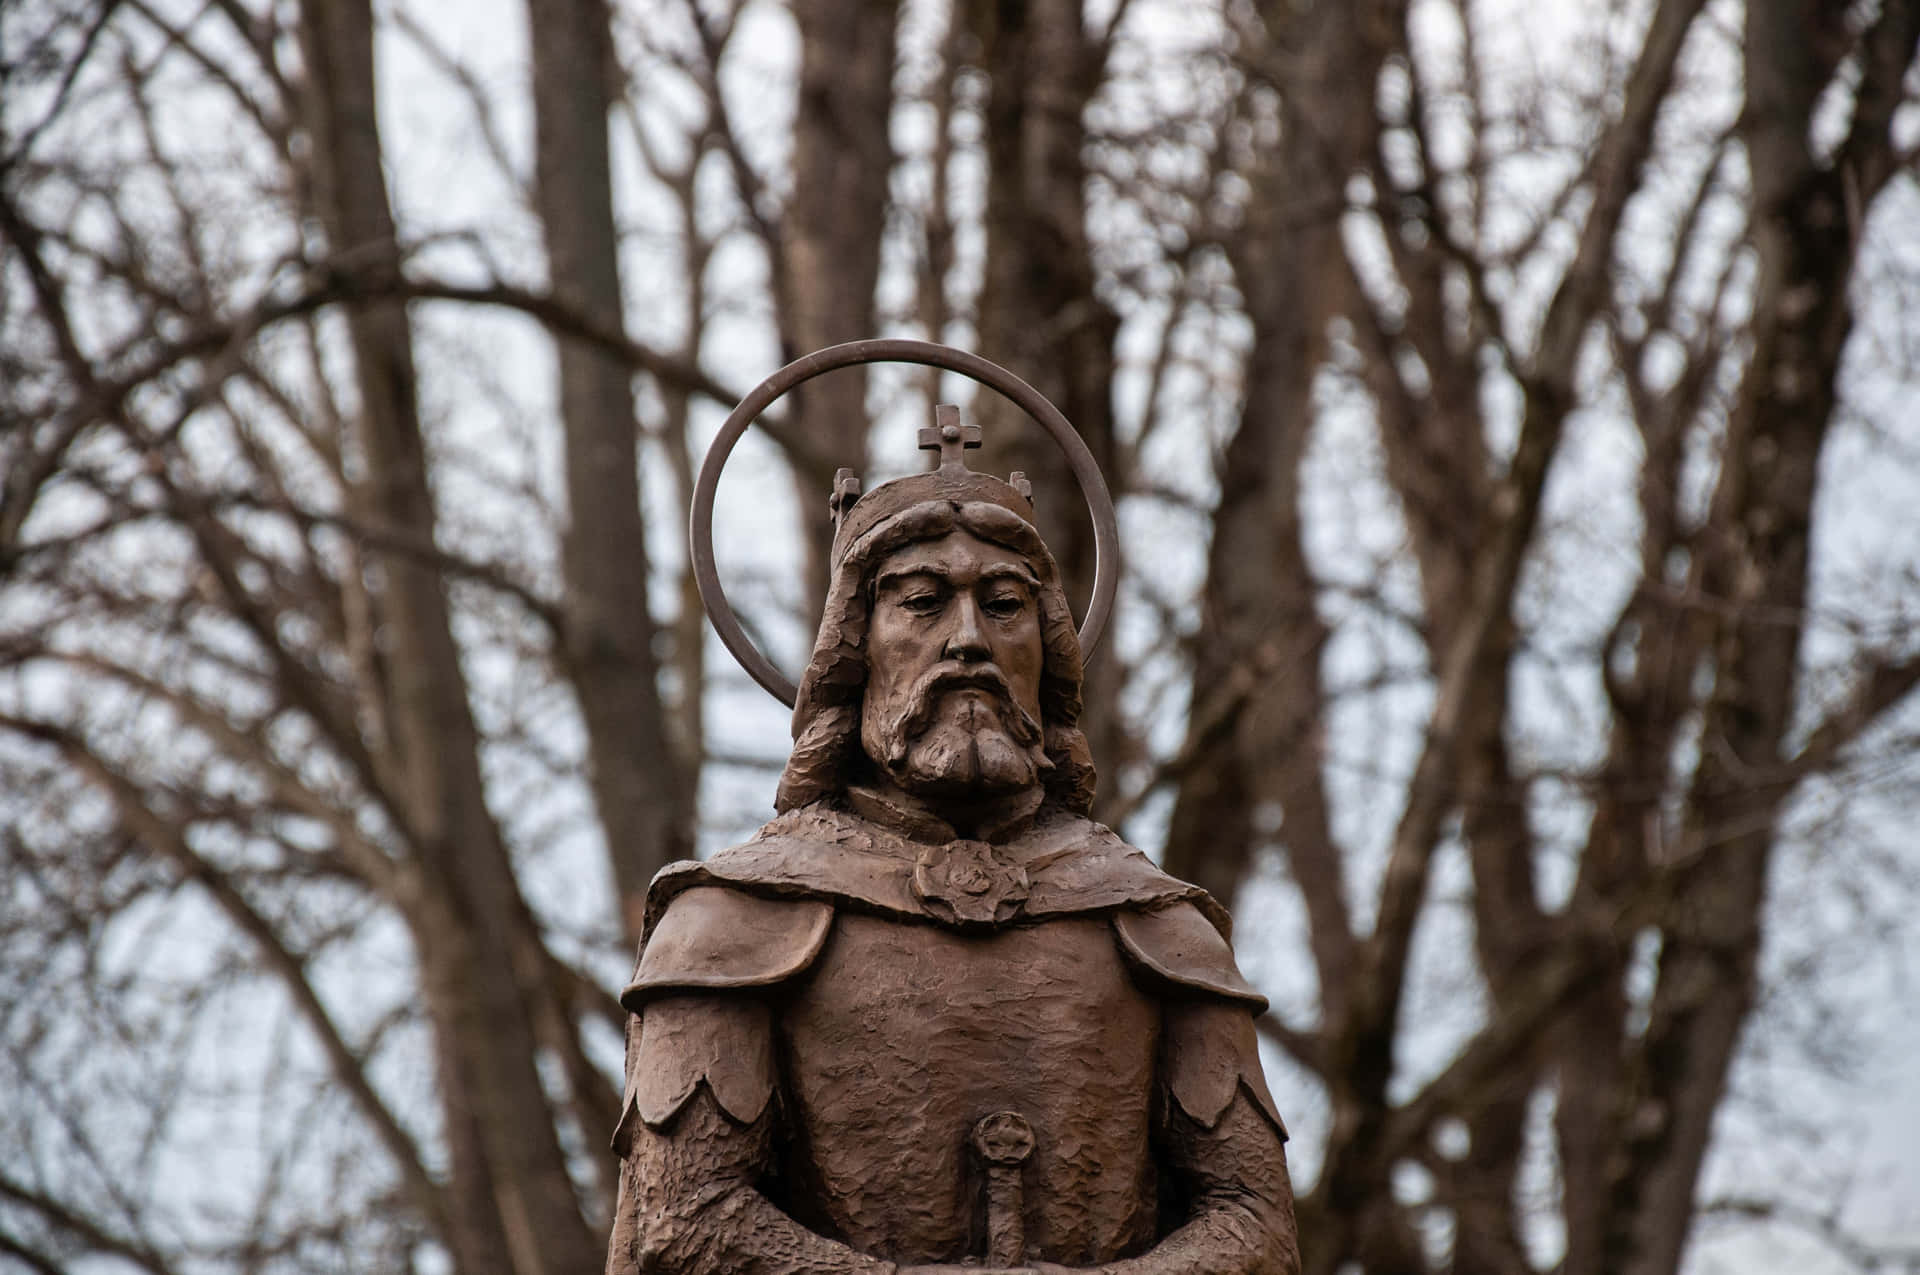 A Statue Of A Man In Armor